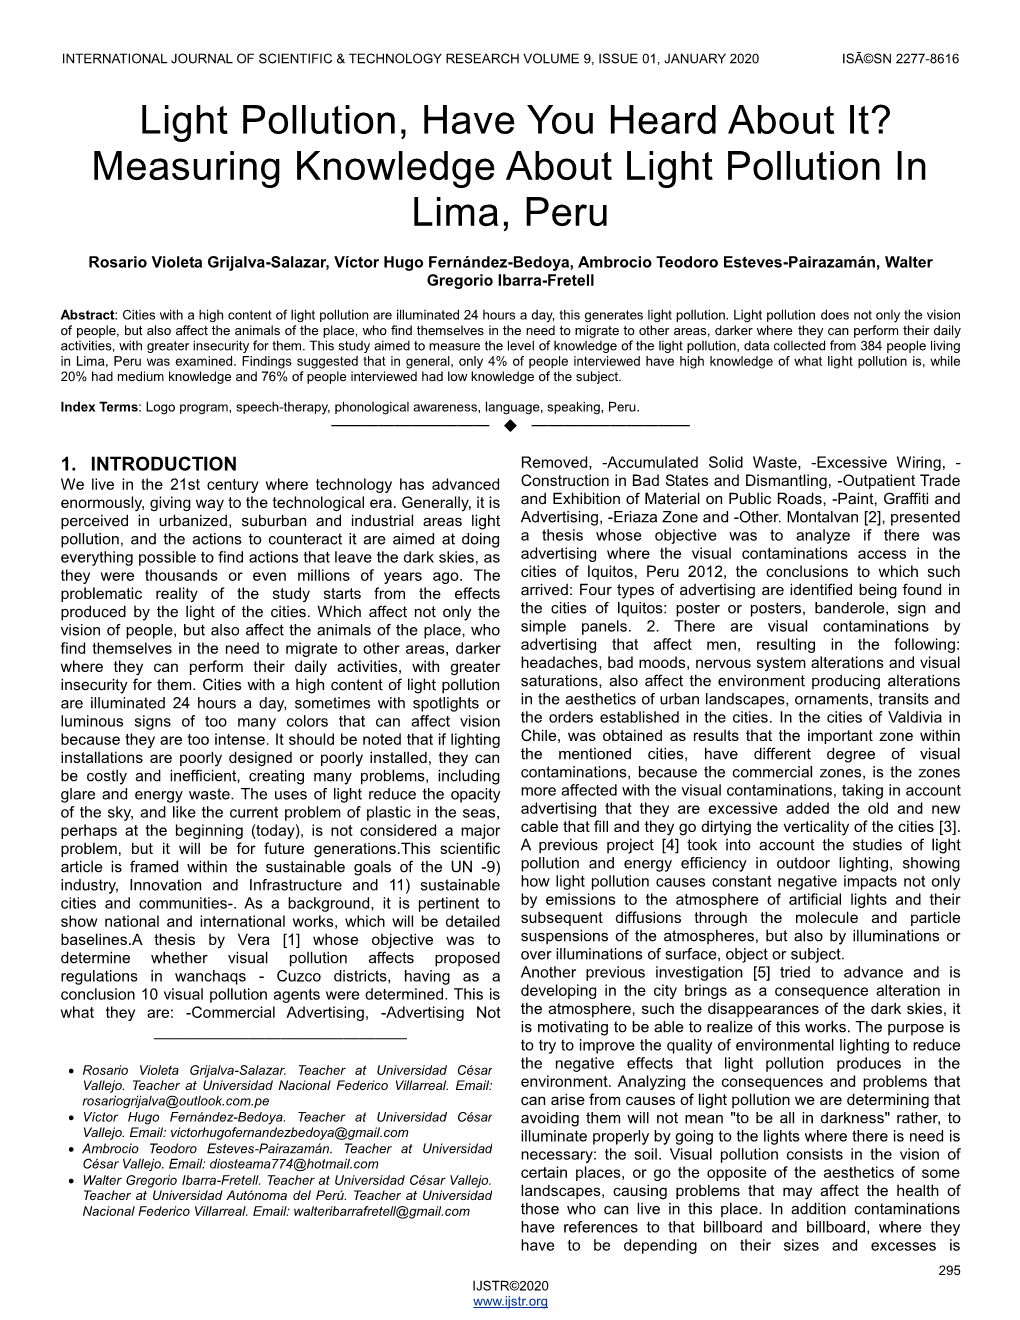 Measuring Knowledge About Light Pollution in Lima, Peru